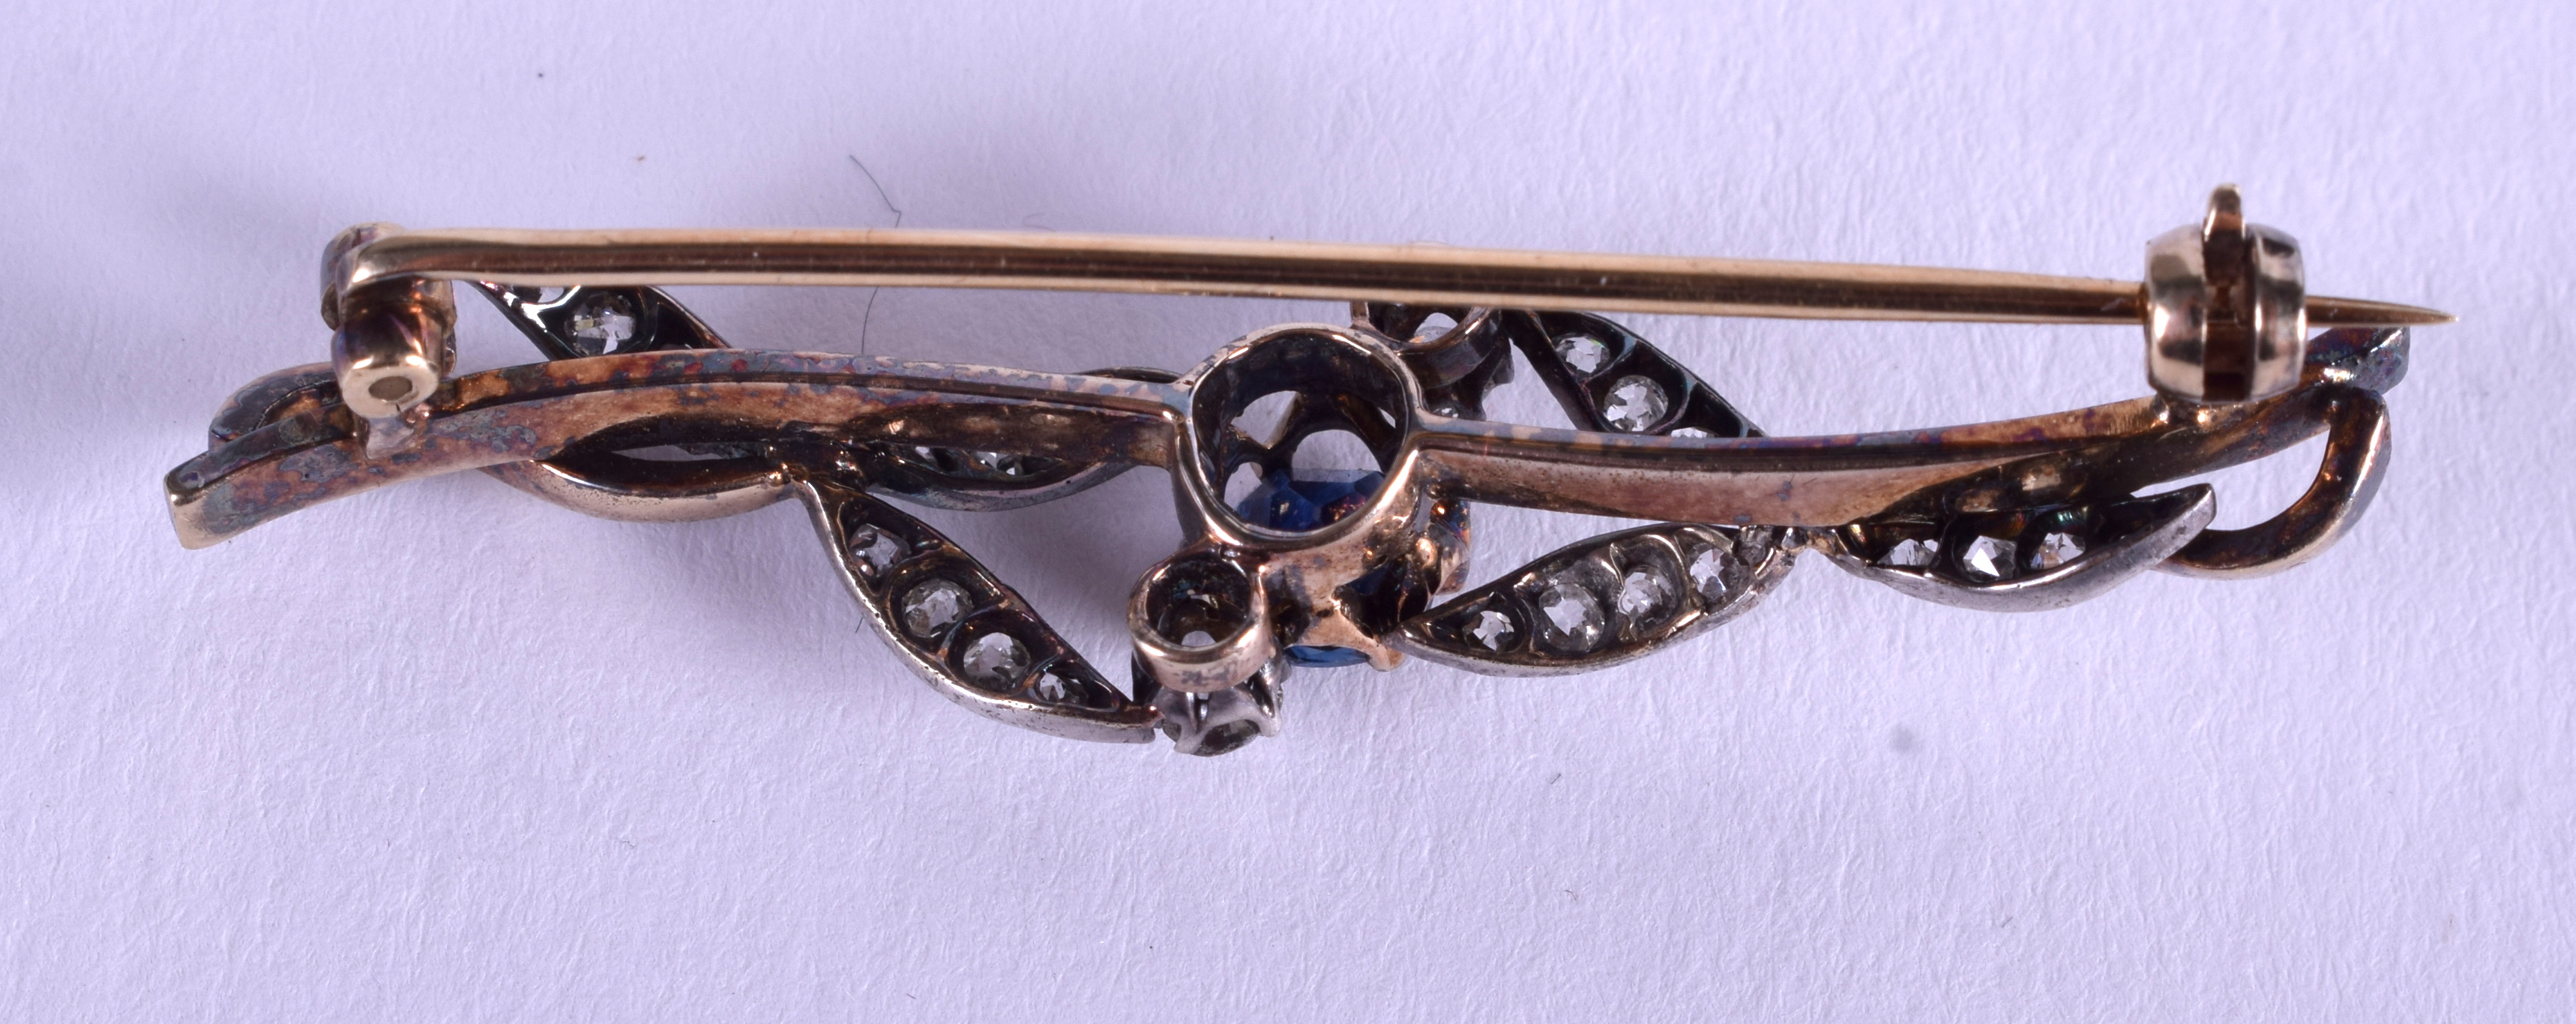 A GOOD VICTORIAN GOLD DIAMOND AND SAPPHIRE BROOCH. 4.5 grams. 4.5 cm wide. - Image 3 of 3